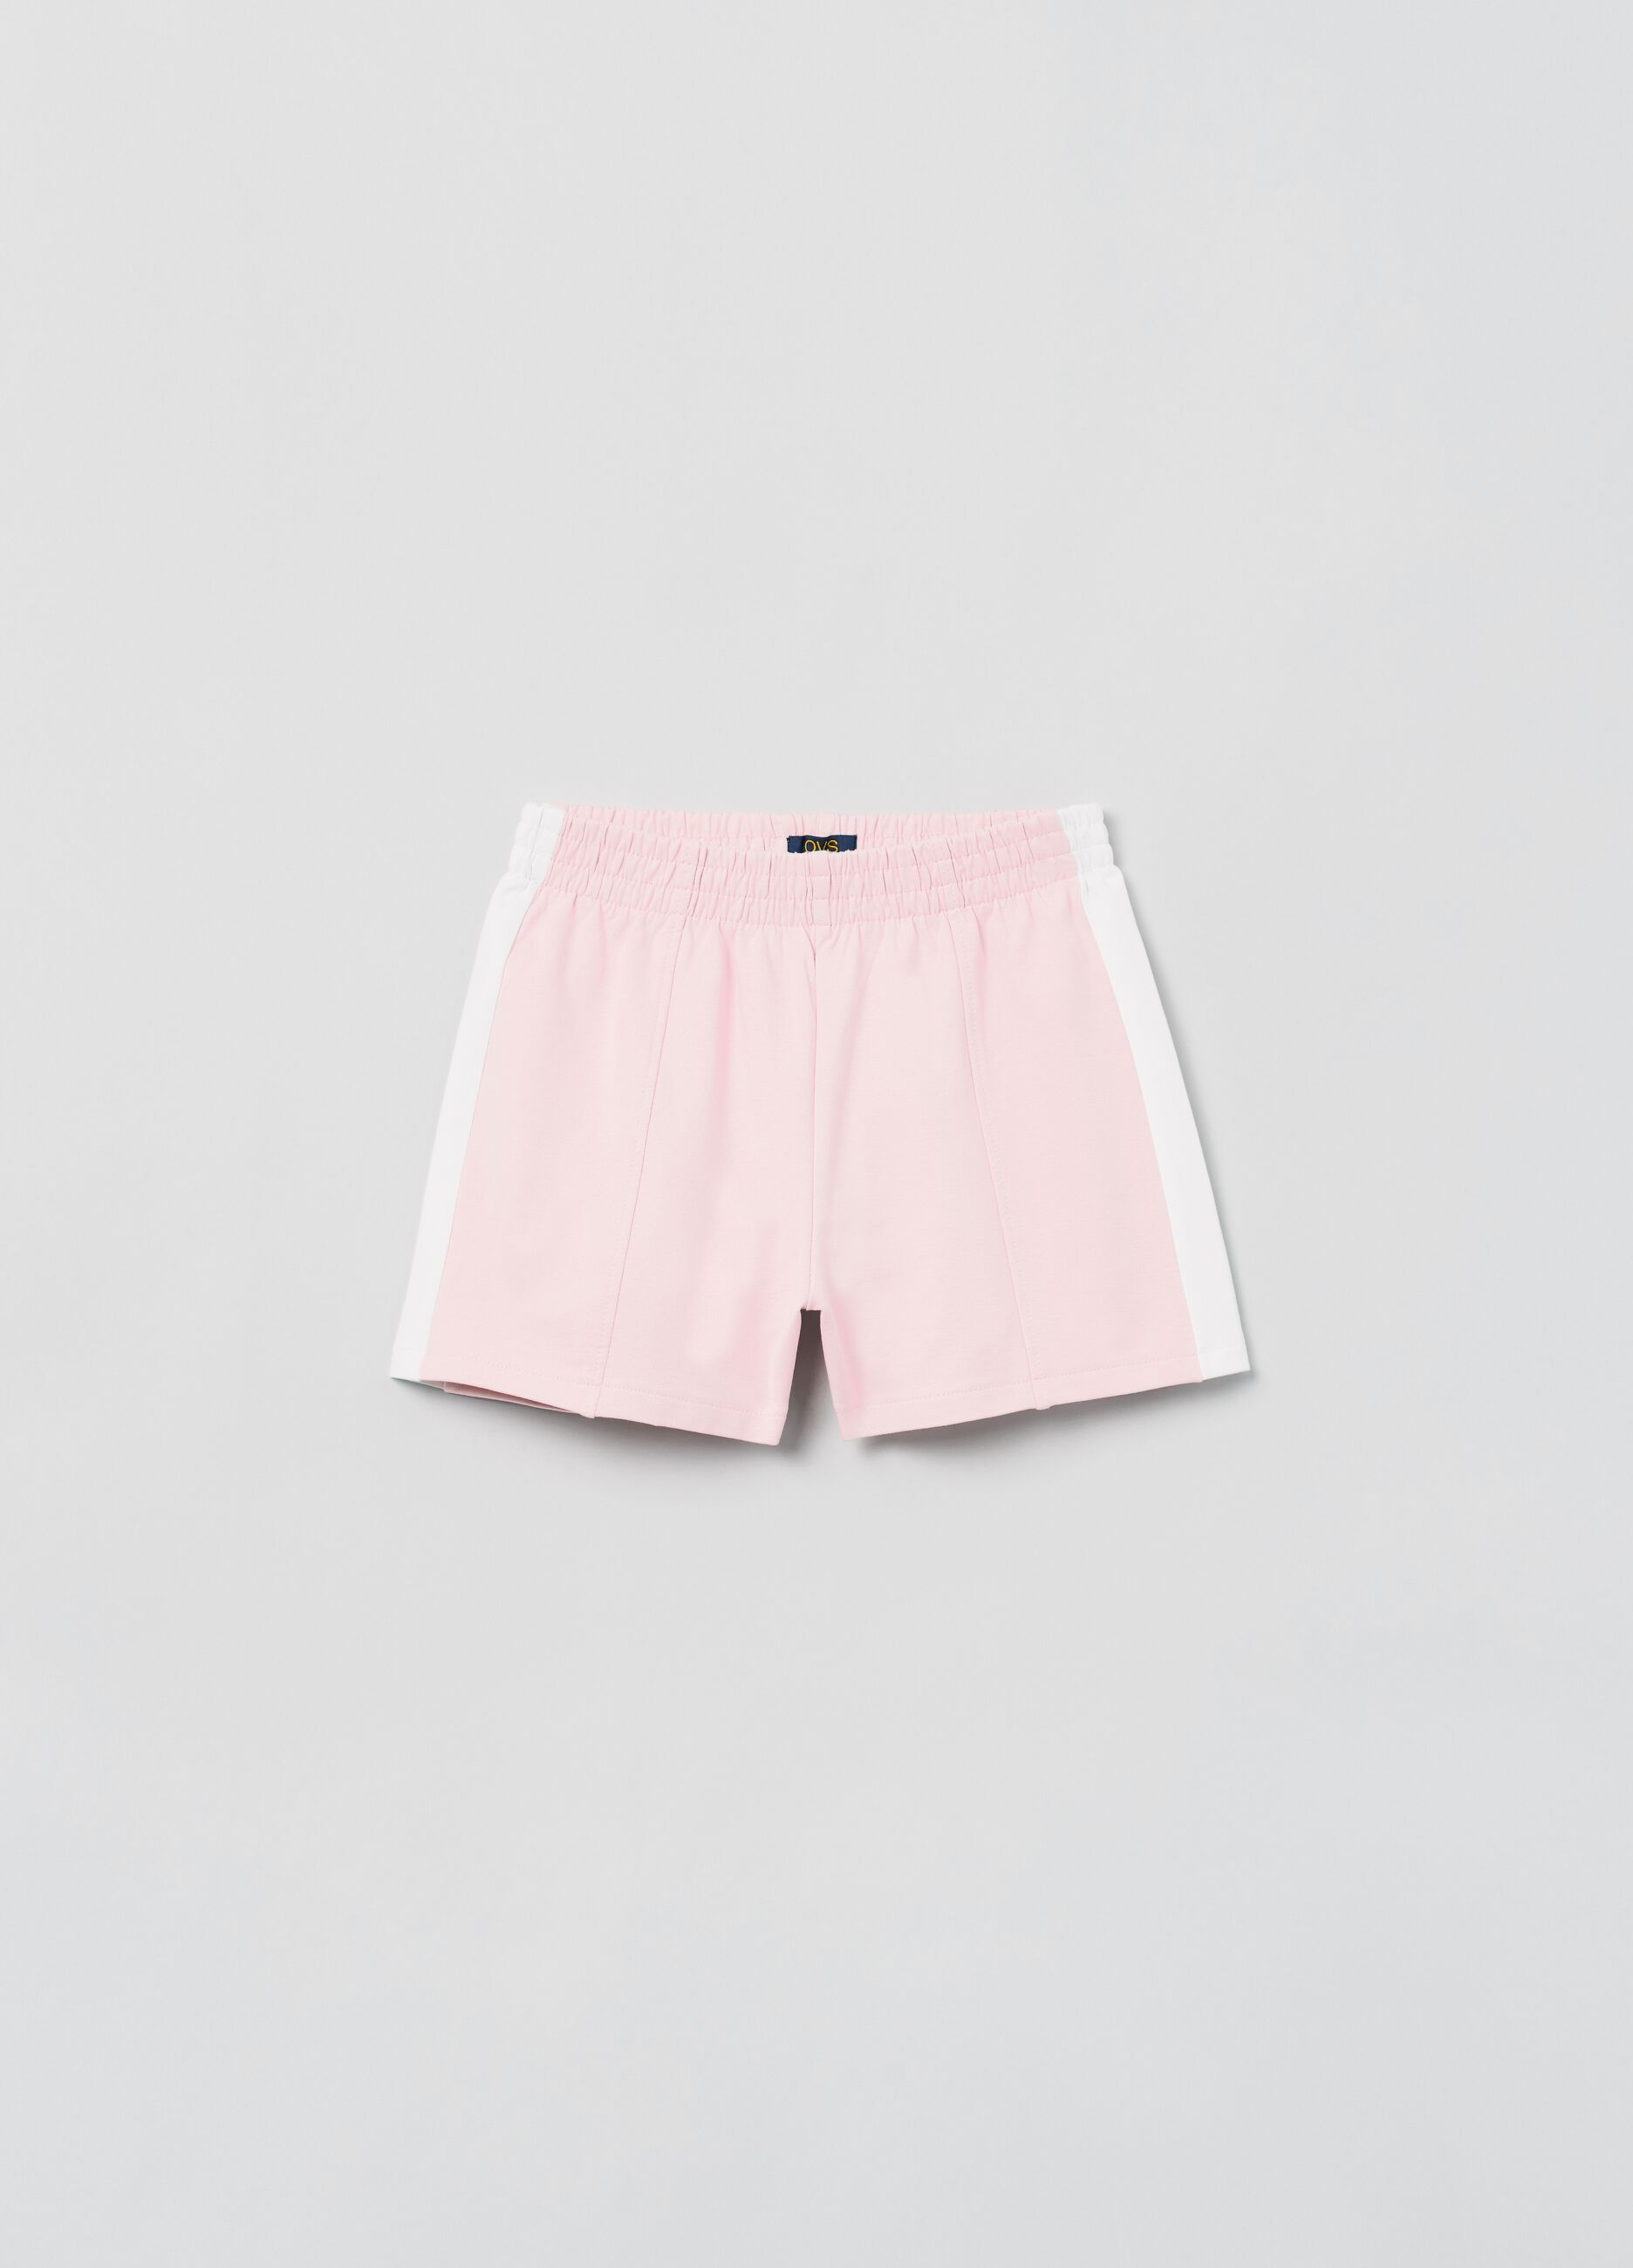 Cotton shorts with contrasting colour bands